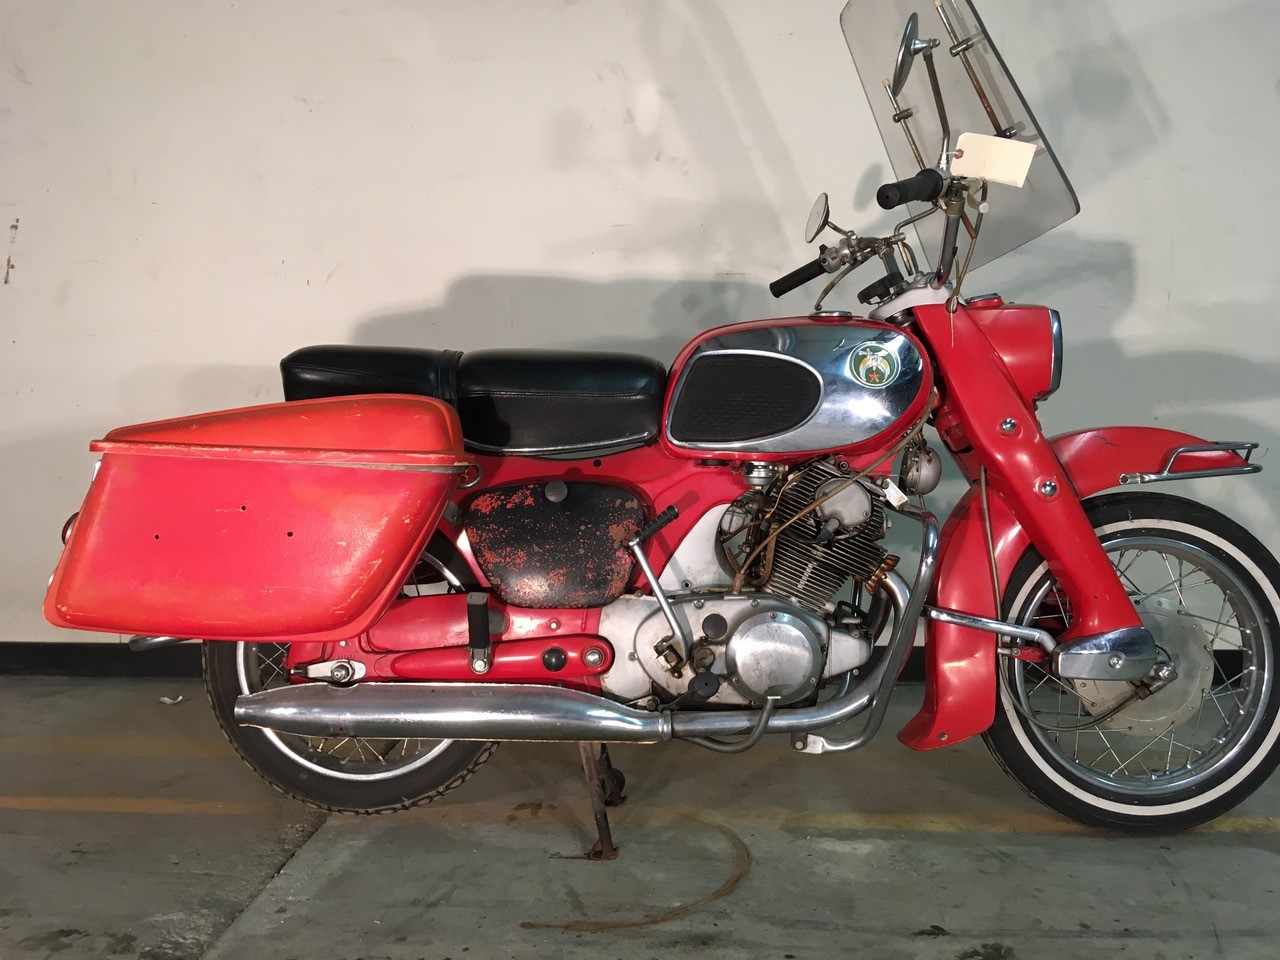 Vintage Motorcycle Auction & Open House! National Motorcycle Museum!  Call today to Consign!  - image 4